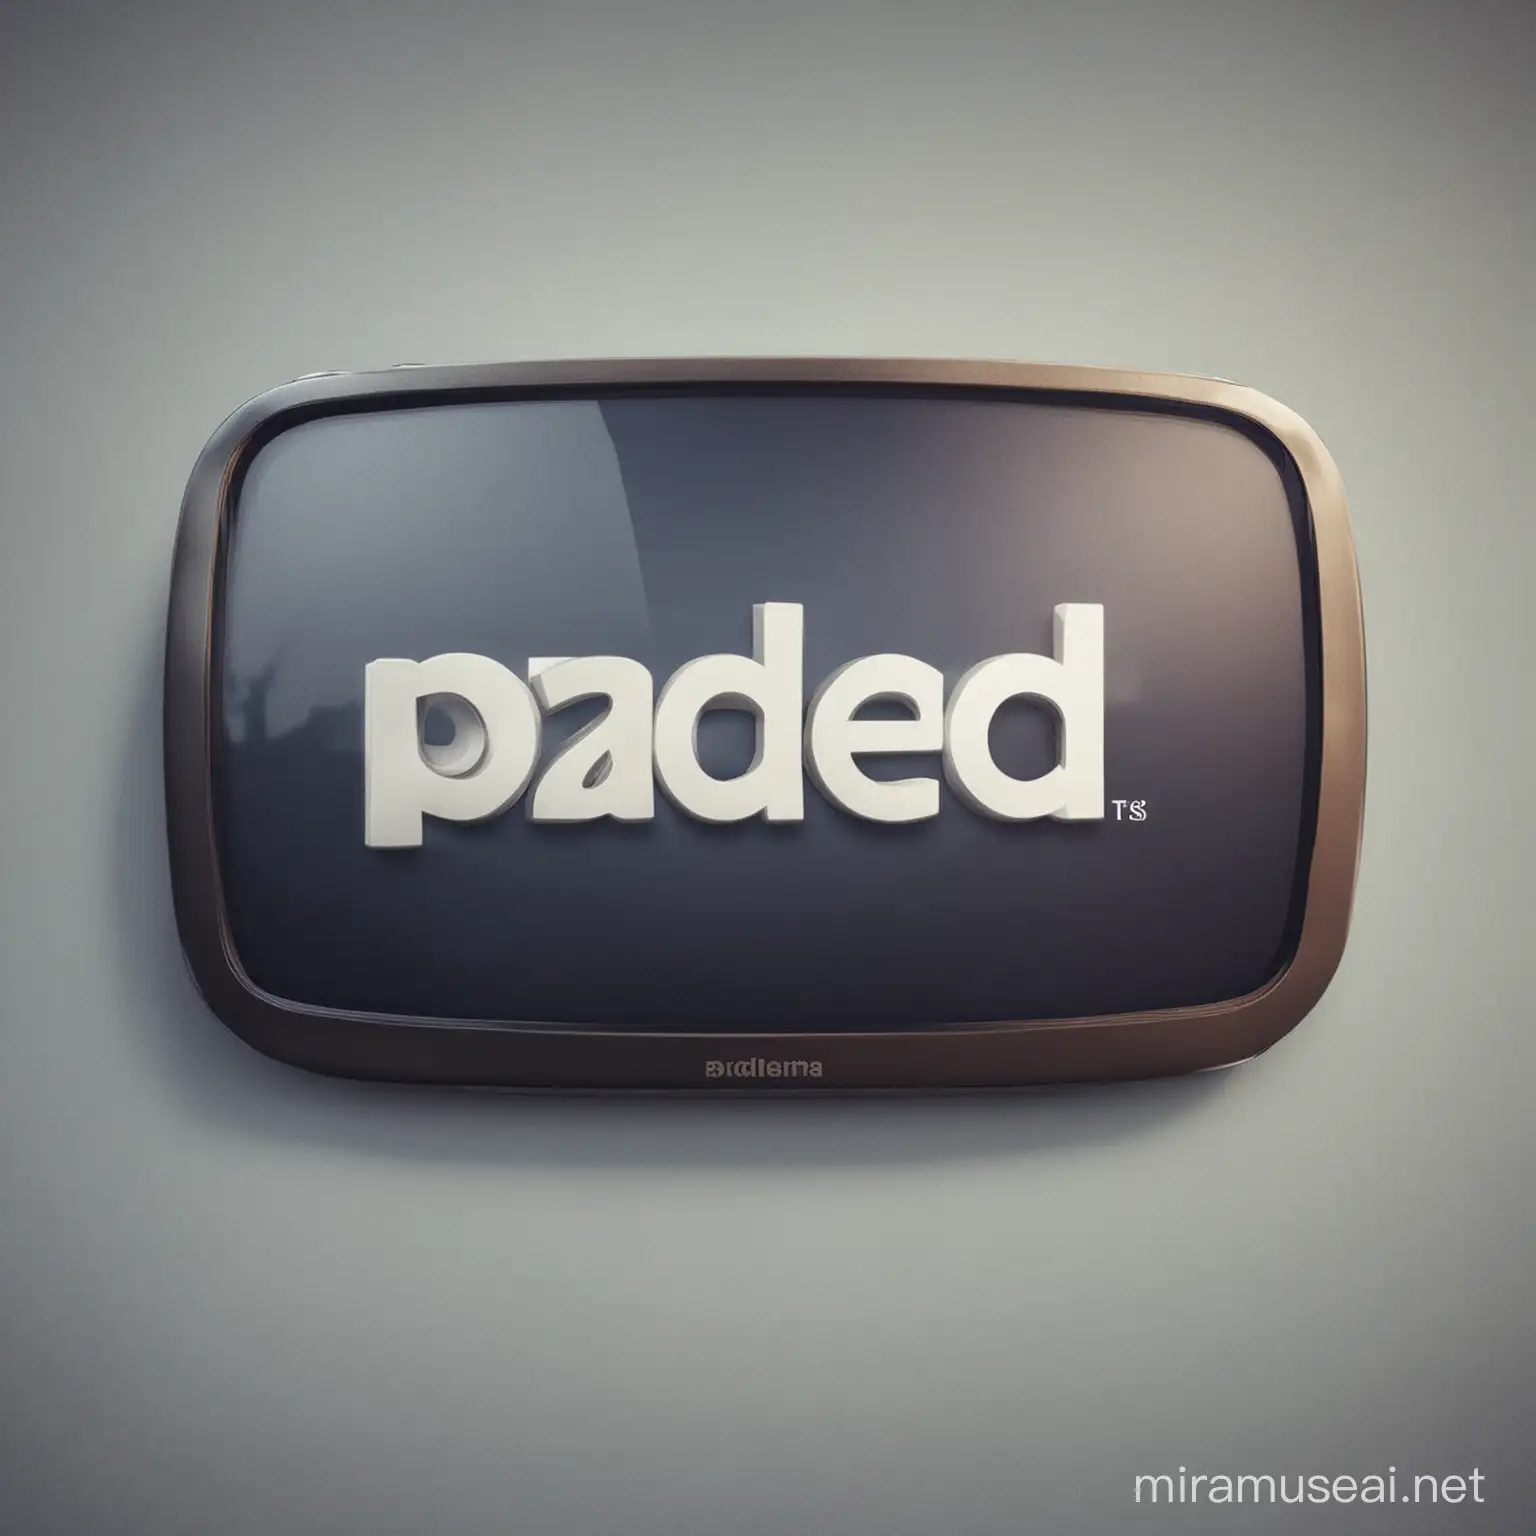 a tv station logo called paded